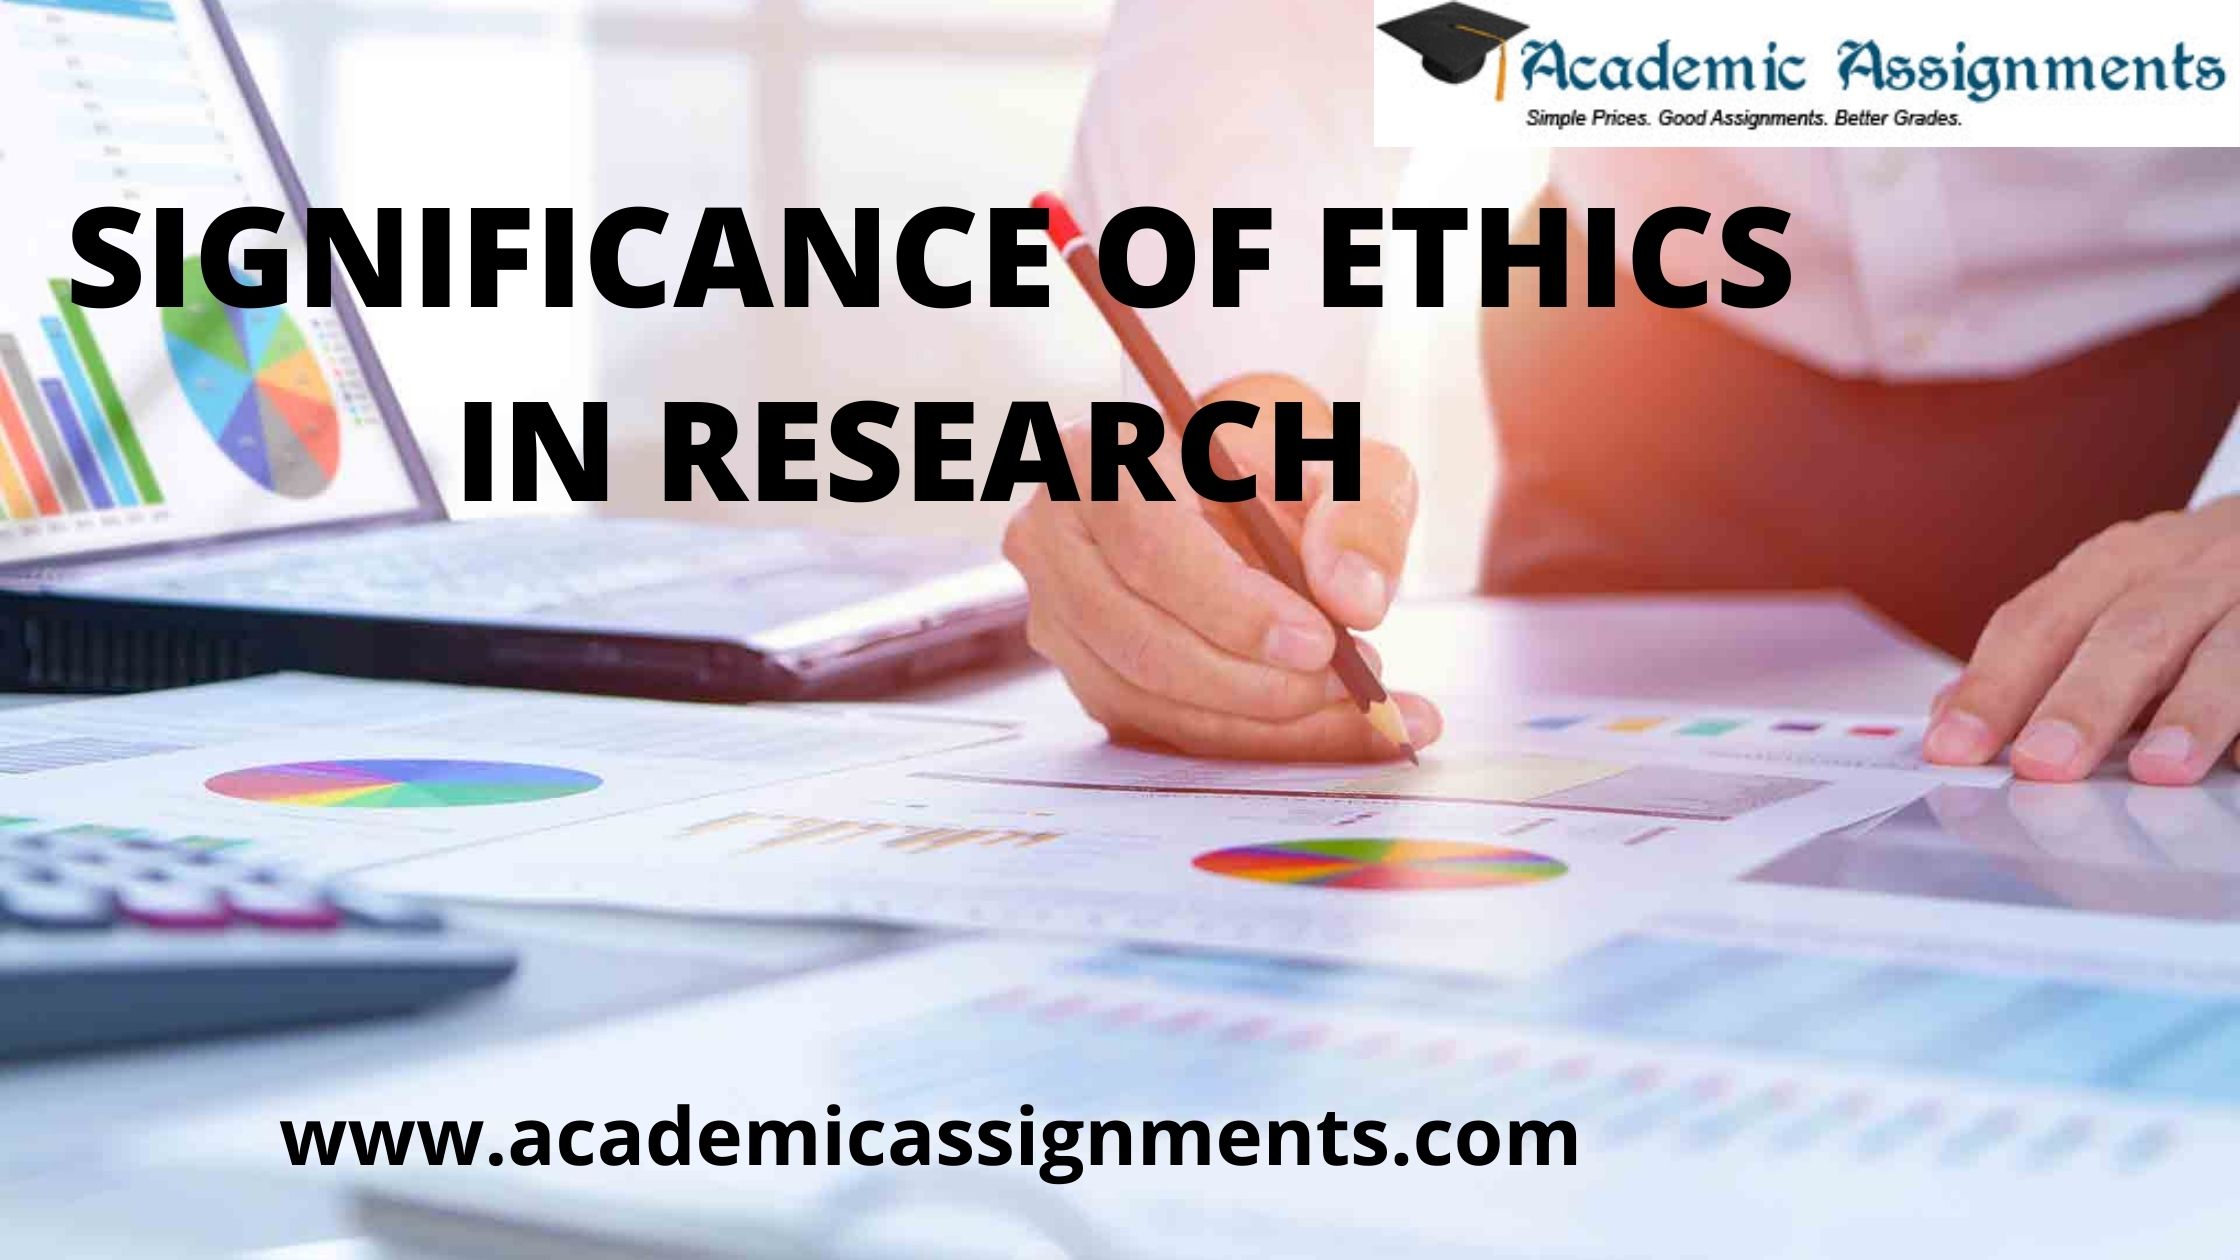 SIGNIFICANCE OF ETHICS IN RESEARCH